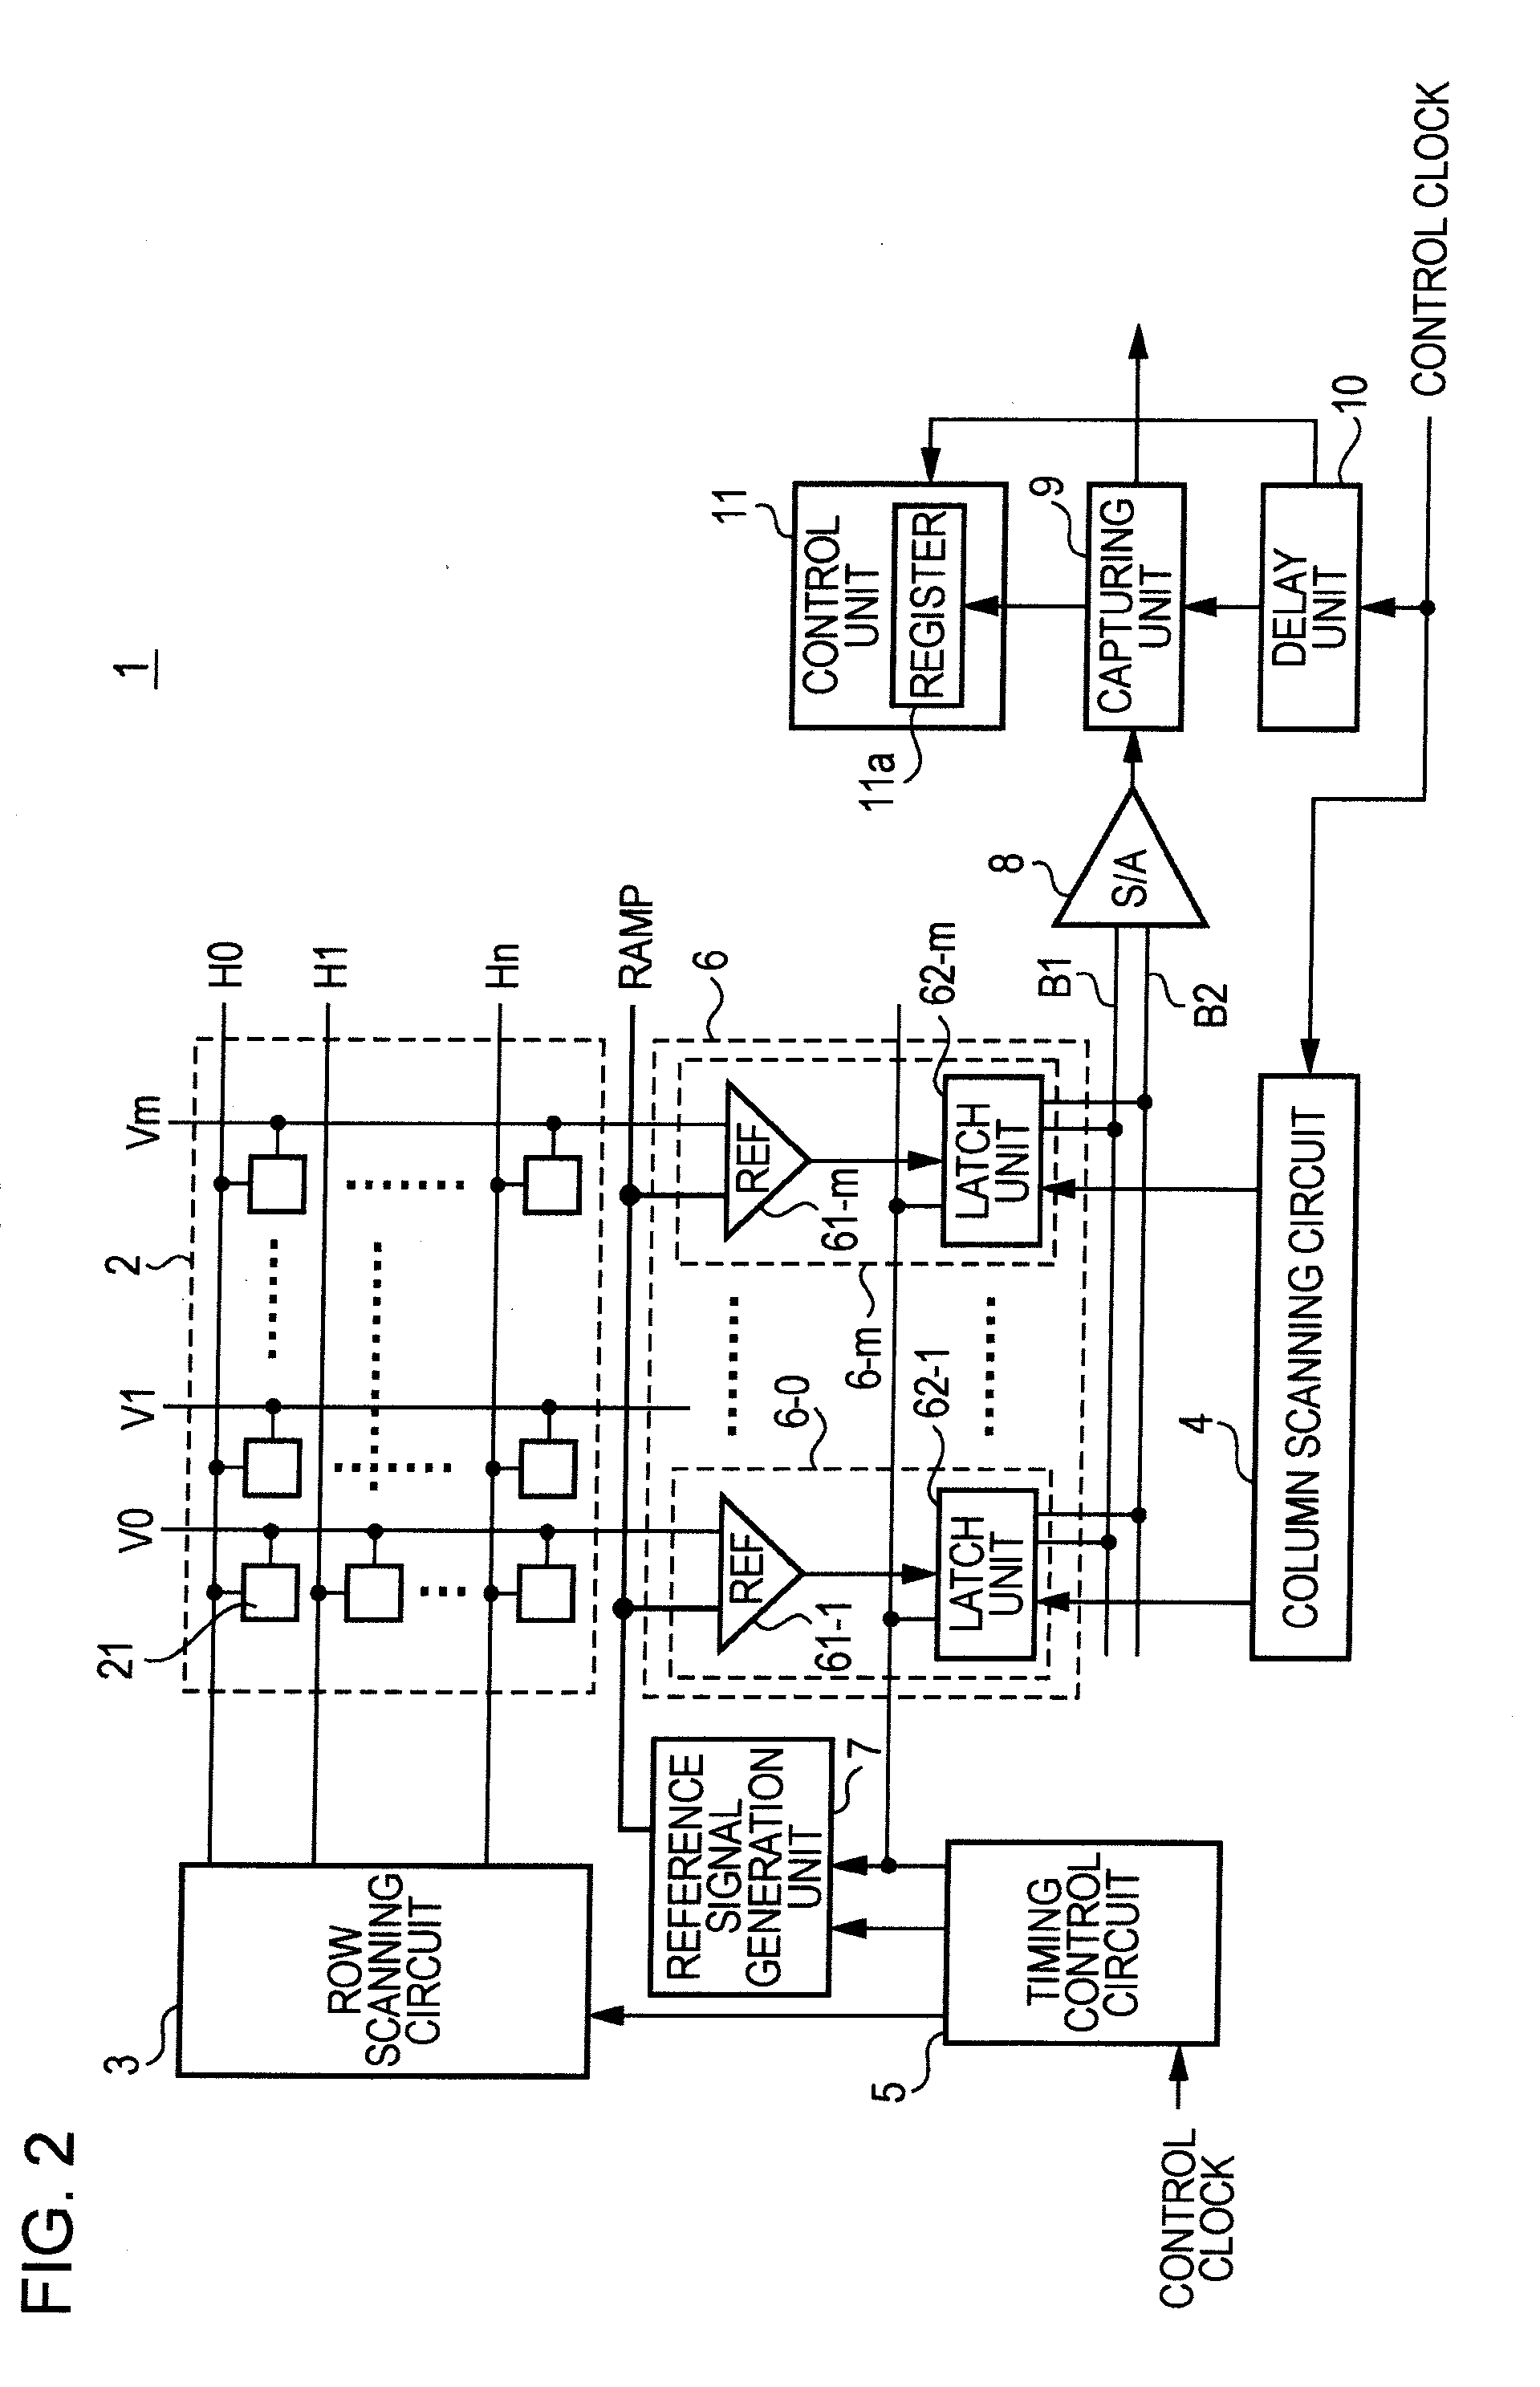 Solid-state imaging device, data transfer circuit, and camera system